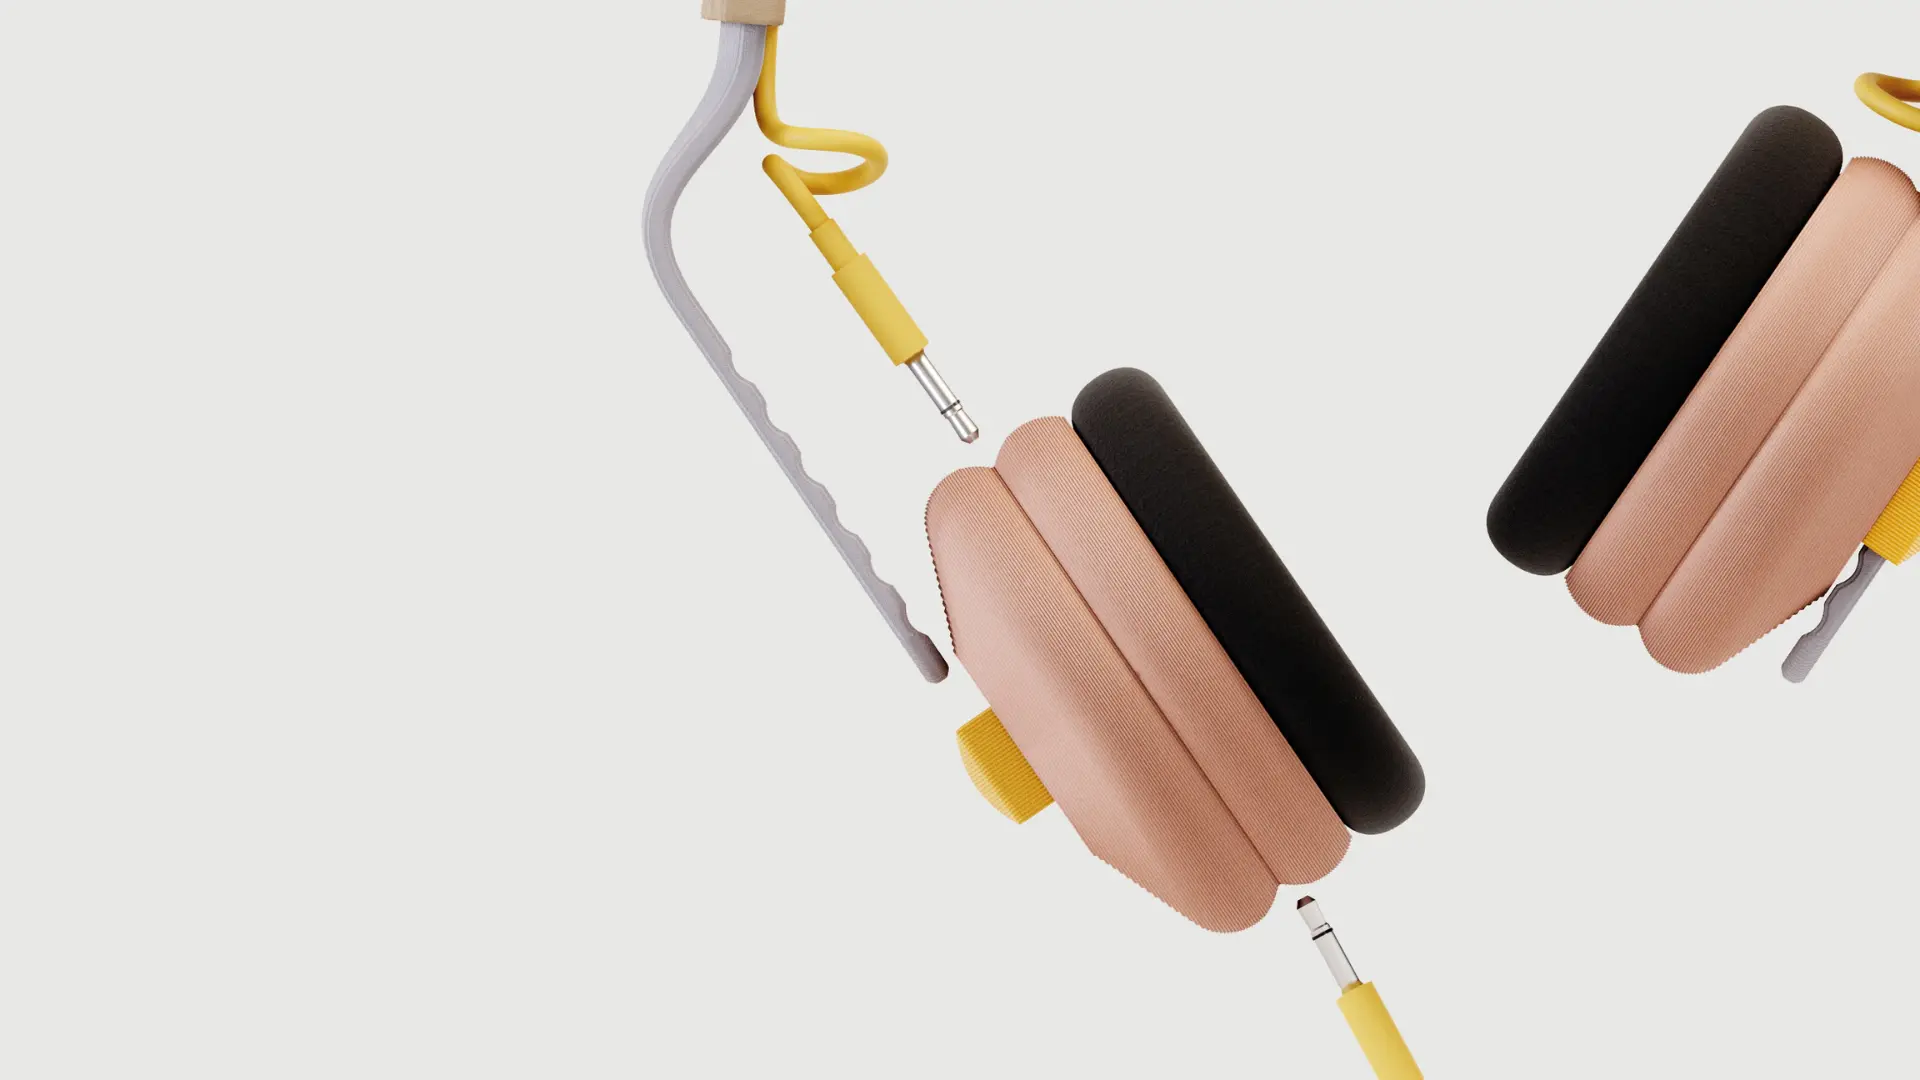 Kibu headphones for children that can be built, repaired and recycled fuss-free